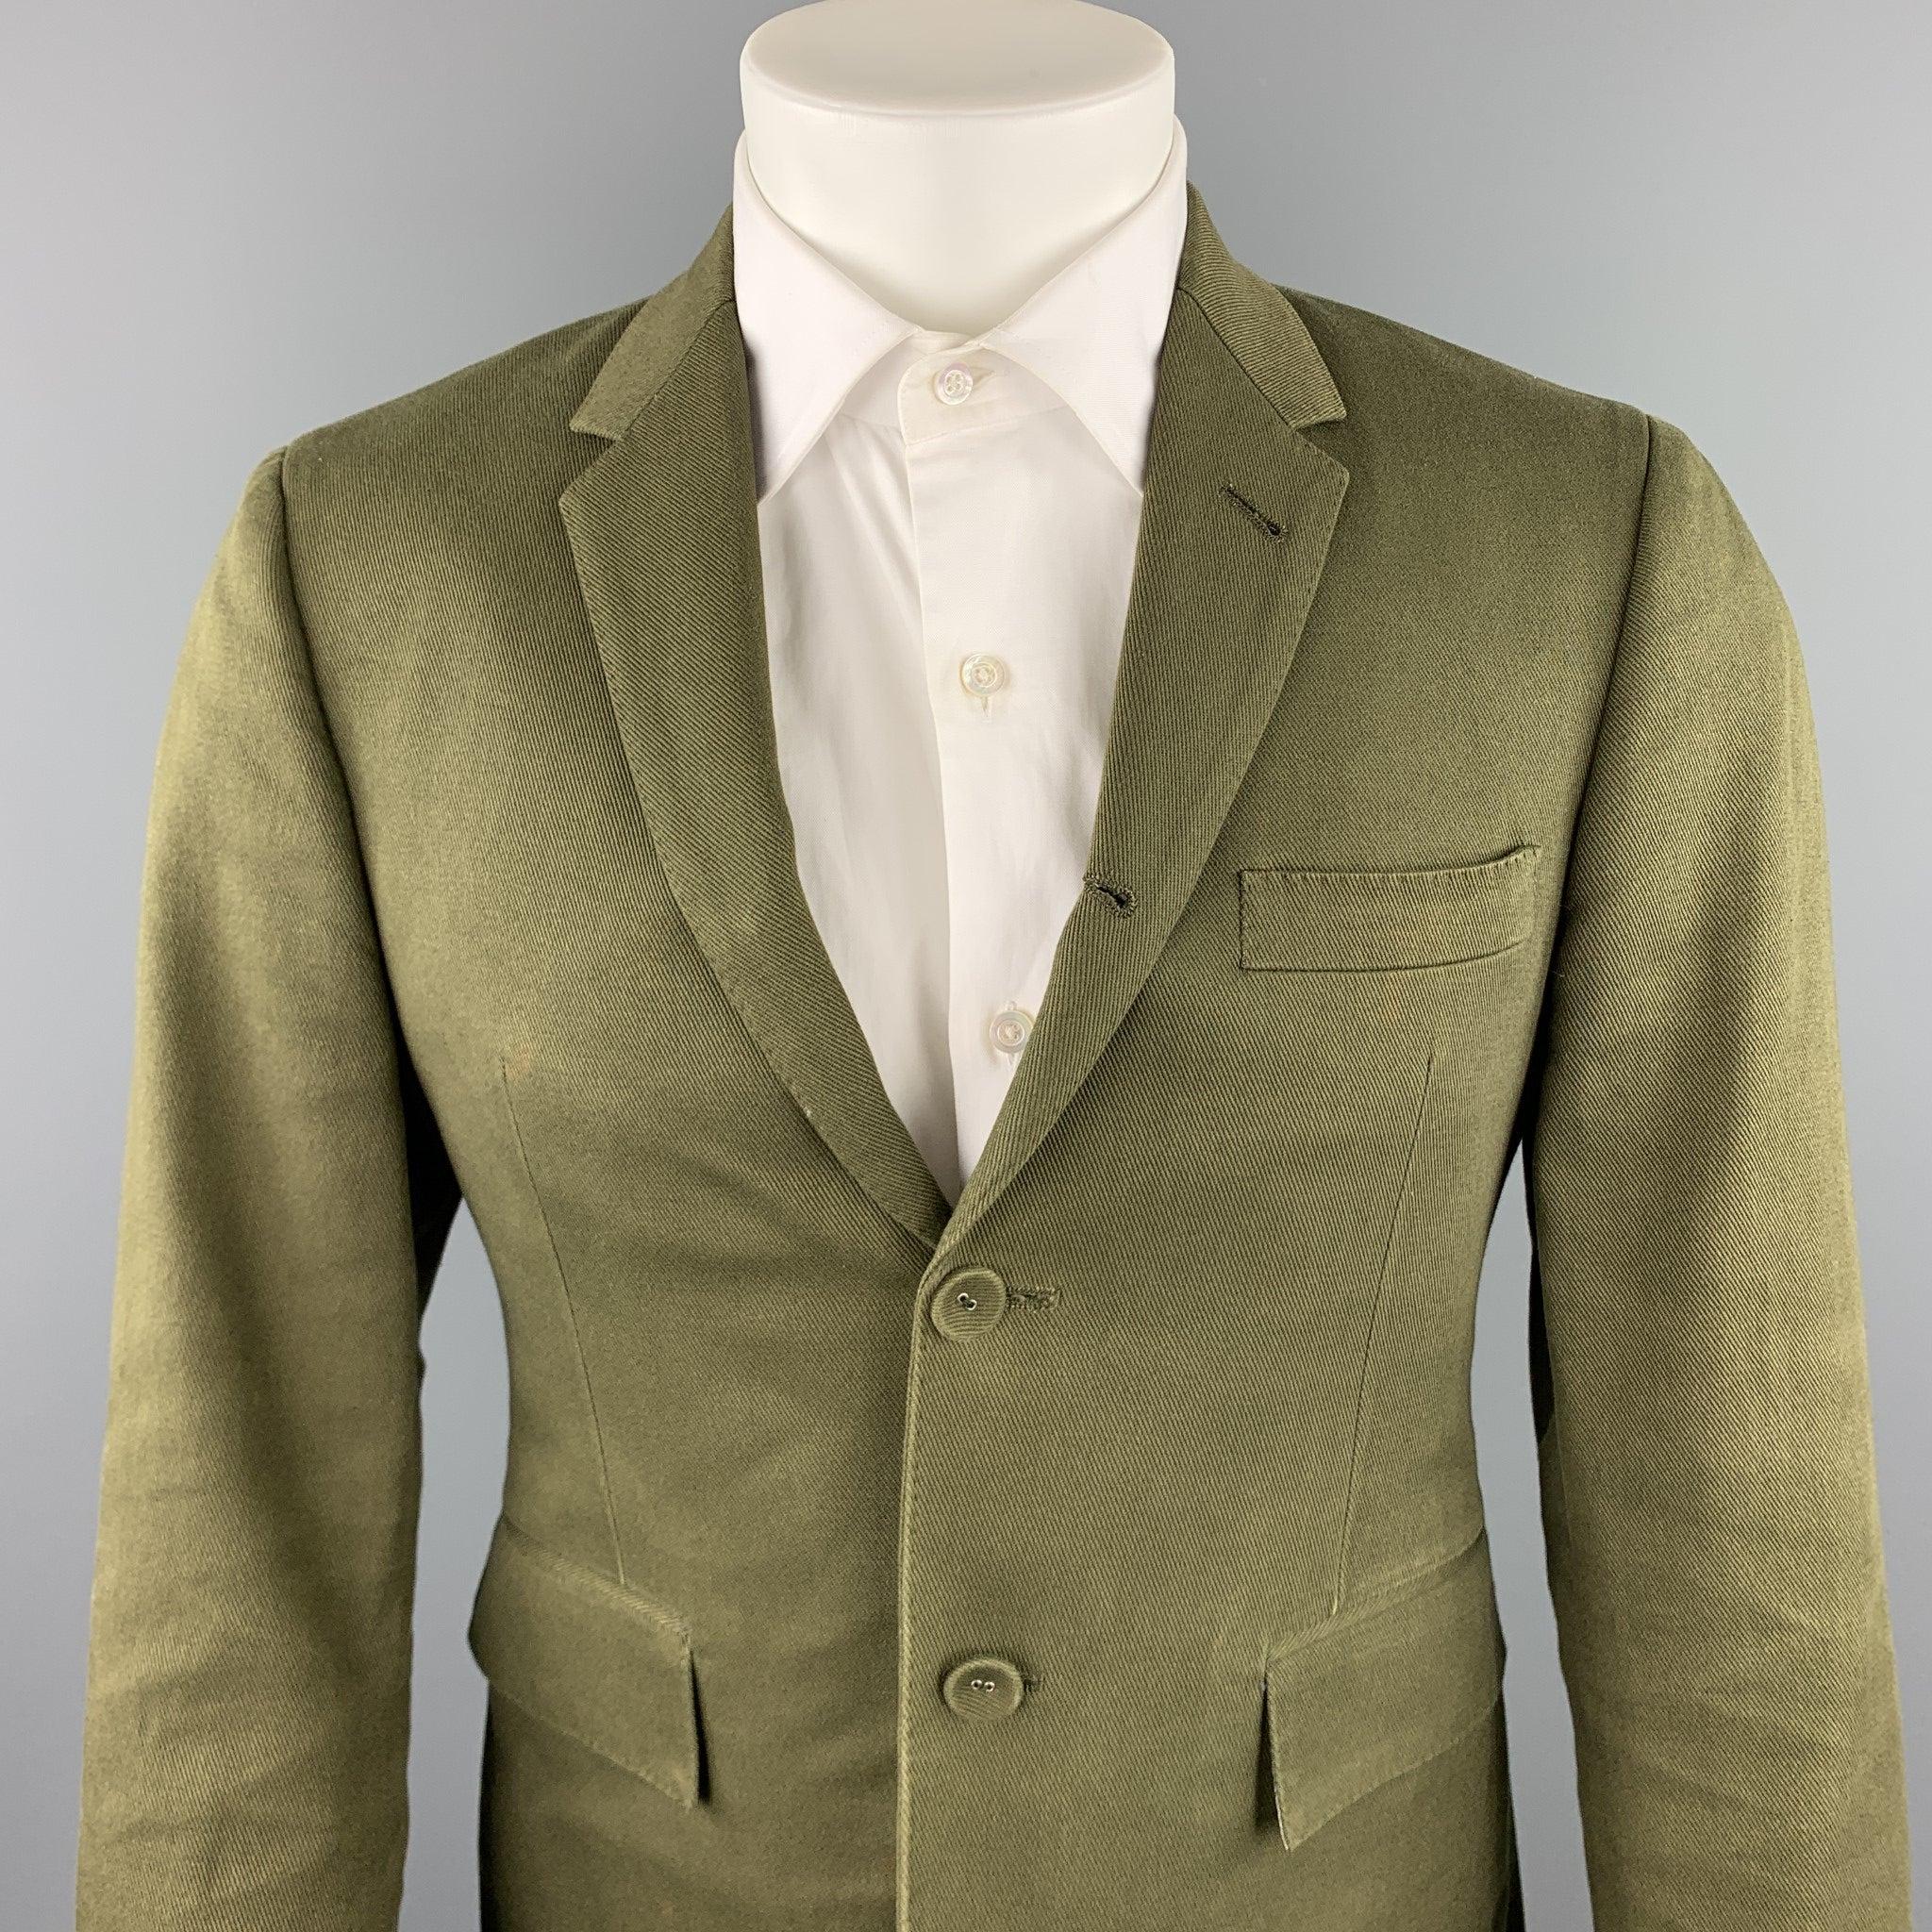 THOM BROWNE sport coat comes in a olive cotton with a full stripe liner featuring a notch lapel, flap pockets, and a two button closure. Minor discoloration. As-Is. Made in Japan.Good
Pre-Owned Condition. 

Marked:   1 

Measurements: 
 
Shoulder: